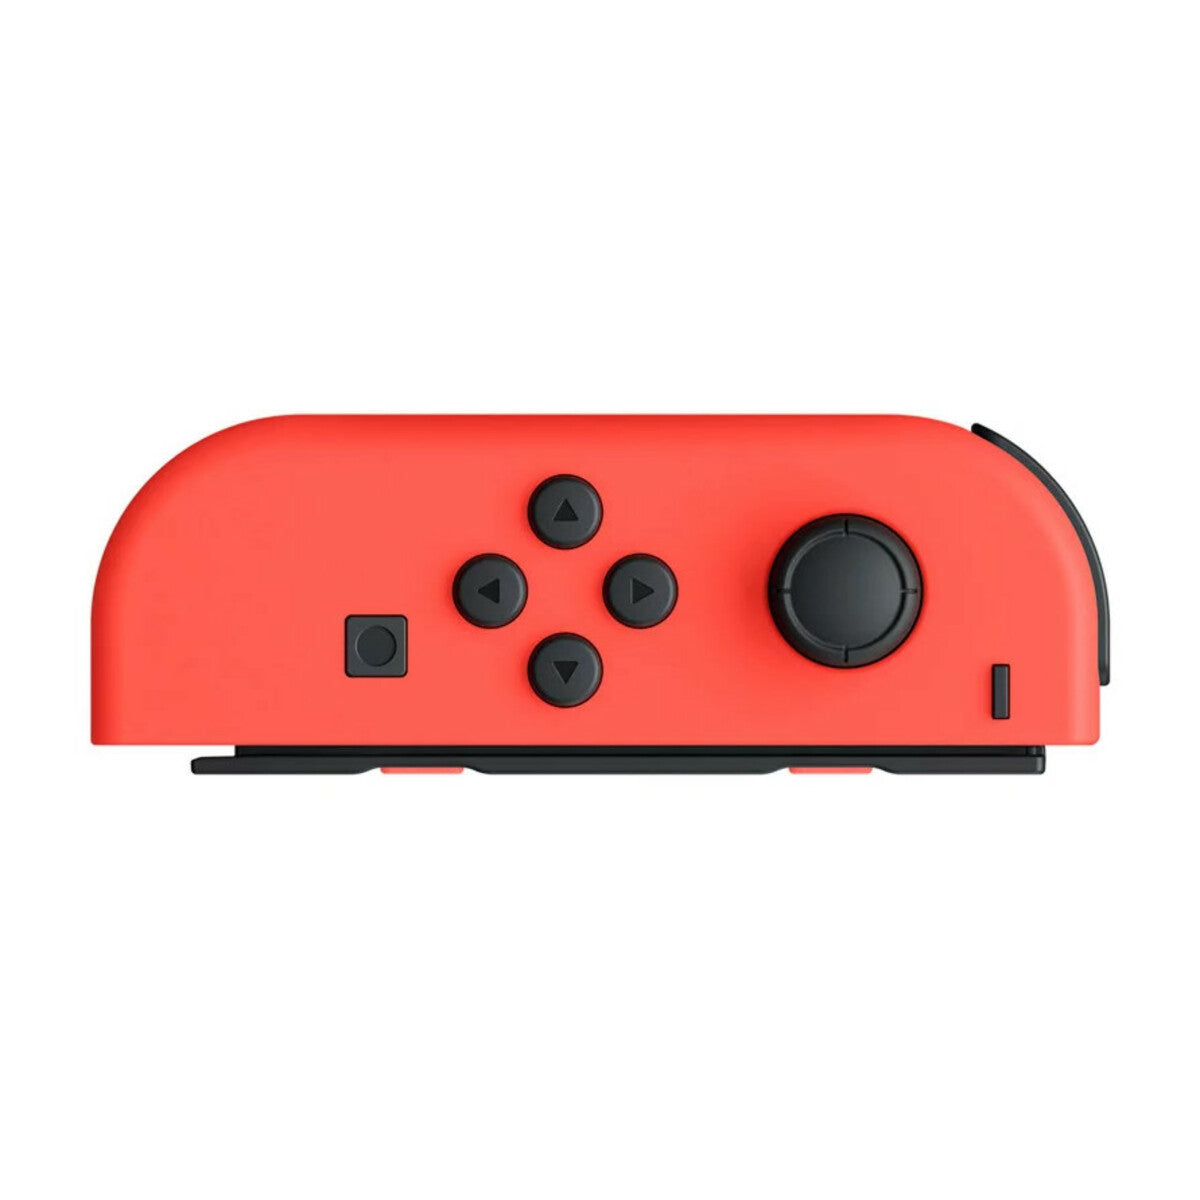 Official Nintendo - Joy-Con (L) Wireless Controller for Nintendo Switch - Neon Red Left